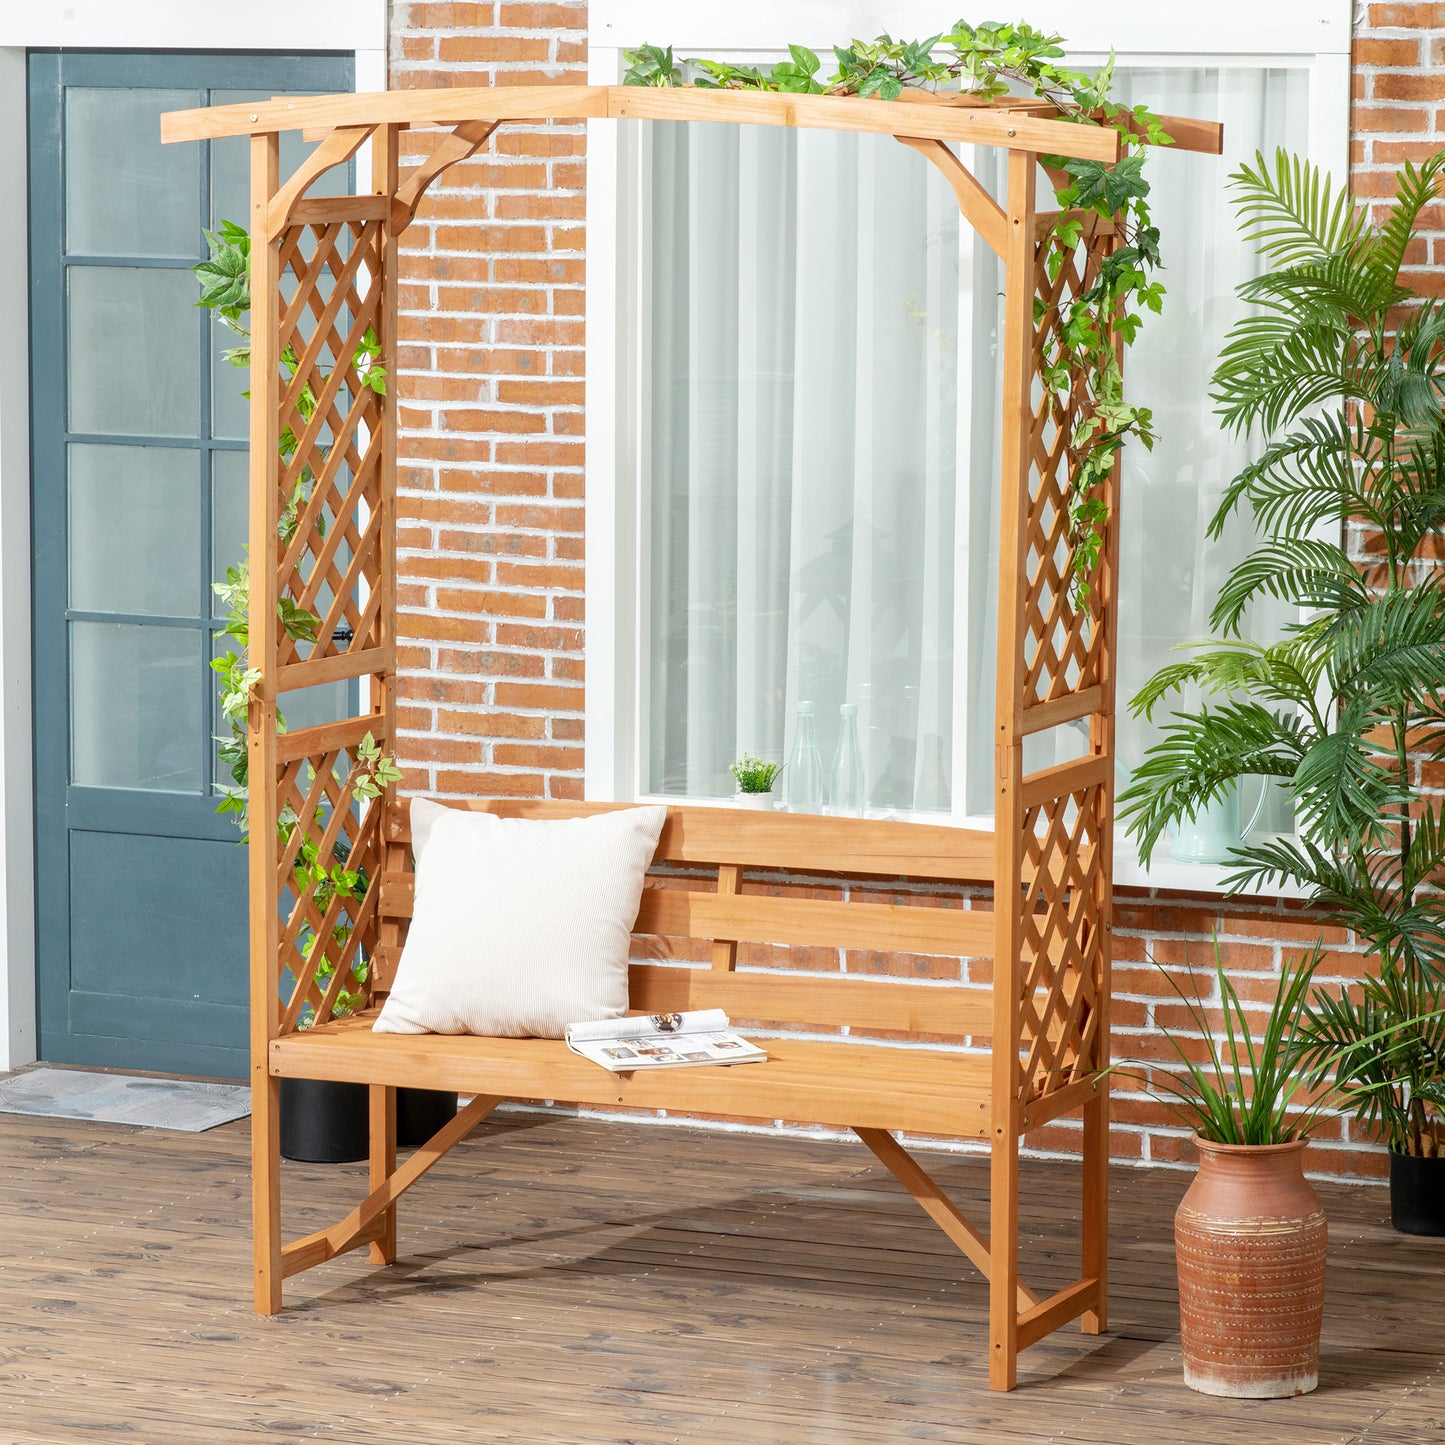 Outsunny Patio Garden Bench, Natural Wooden Garden Arbour with Seat for Vines/Climbing Plants, Natural